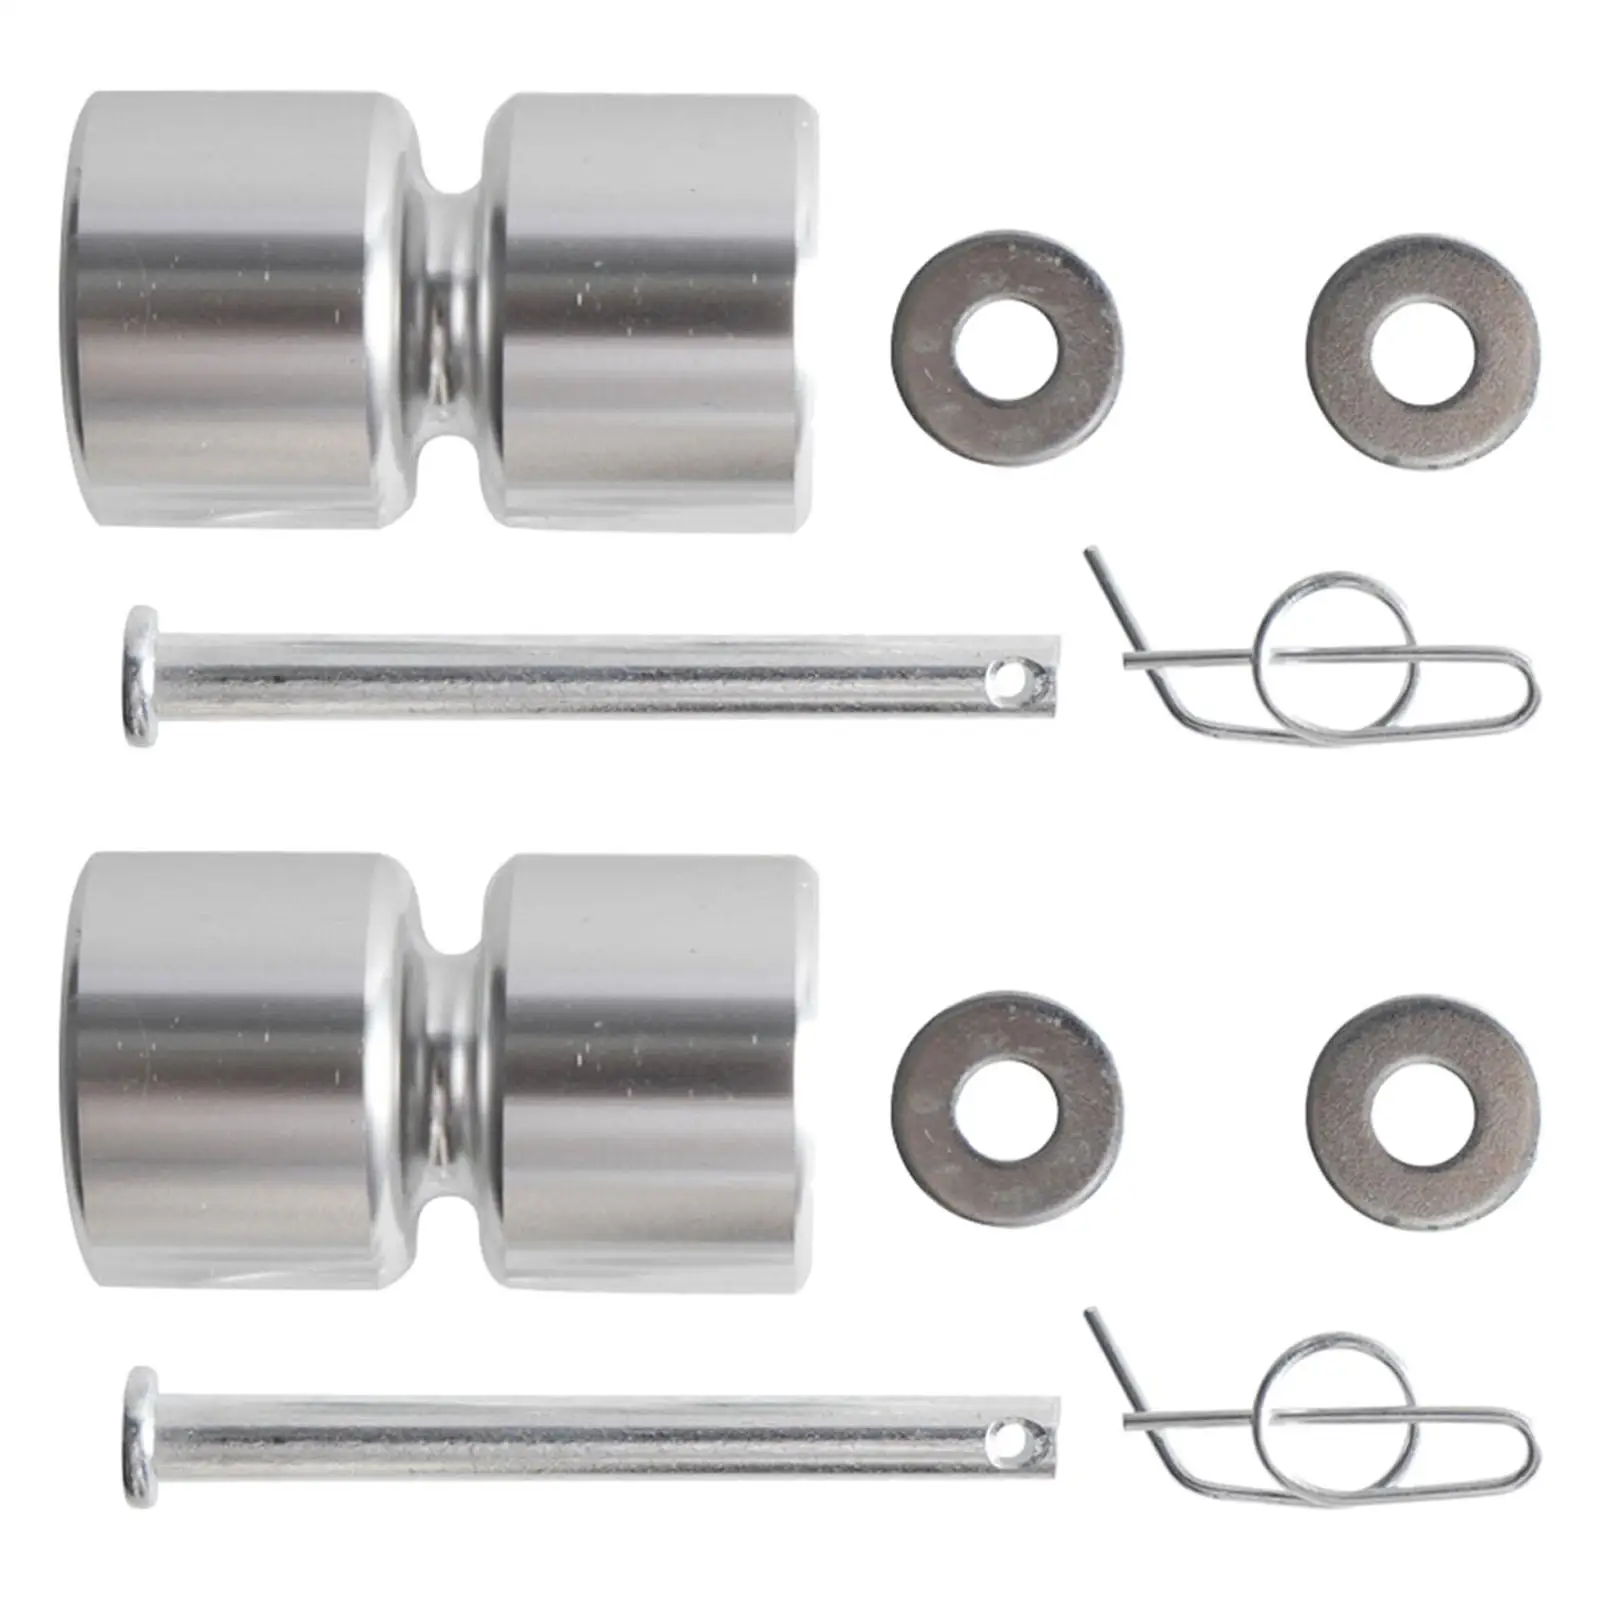 Trailer Tailgate Lift Assist Rollers Kit Auto Accessories for Lift Beds